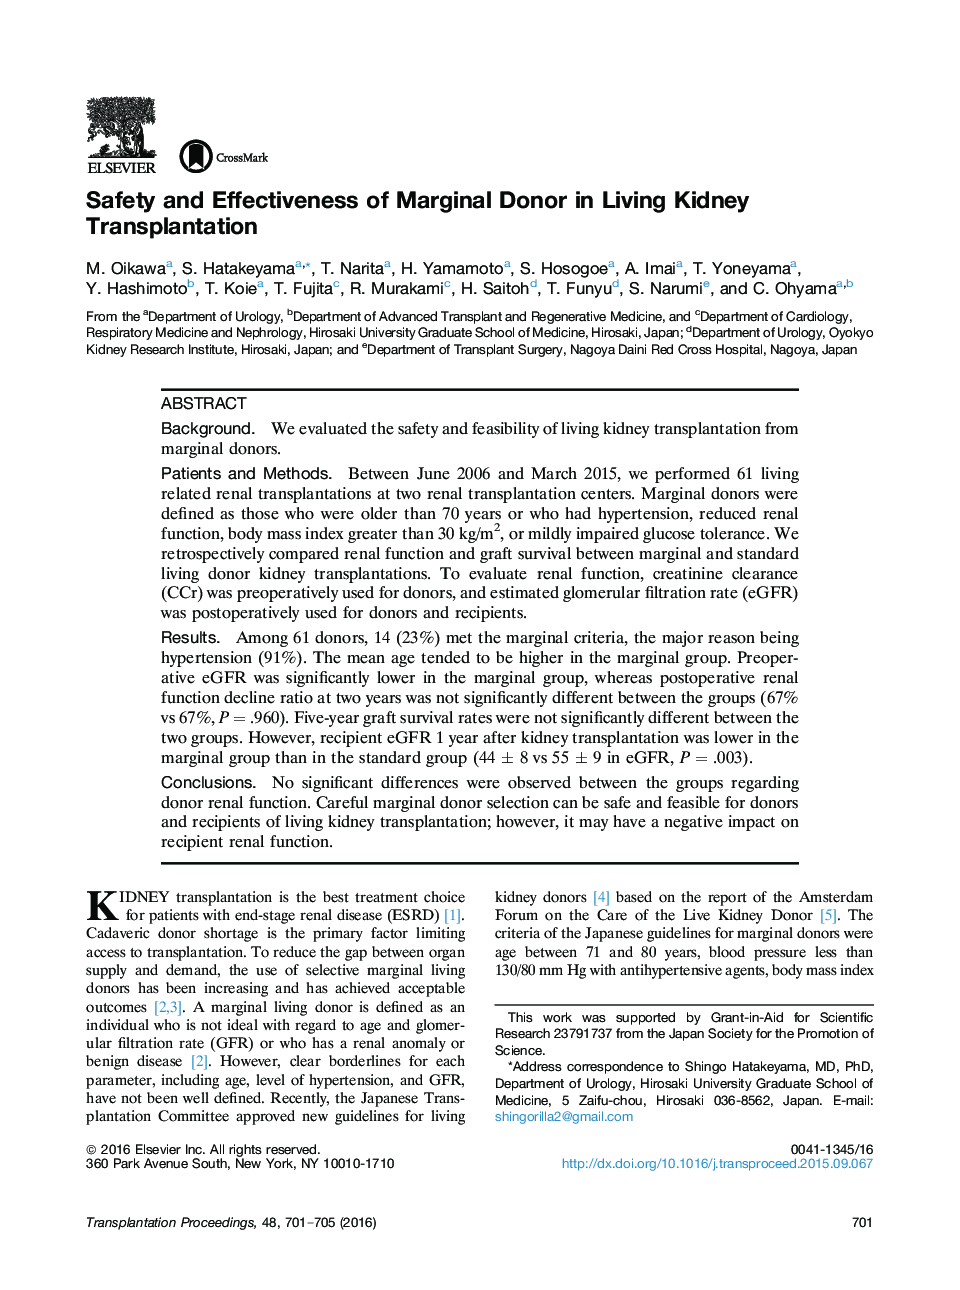 Safety and Effectiveness of Marginal Donor in Living Kidney Transplantation